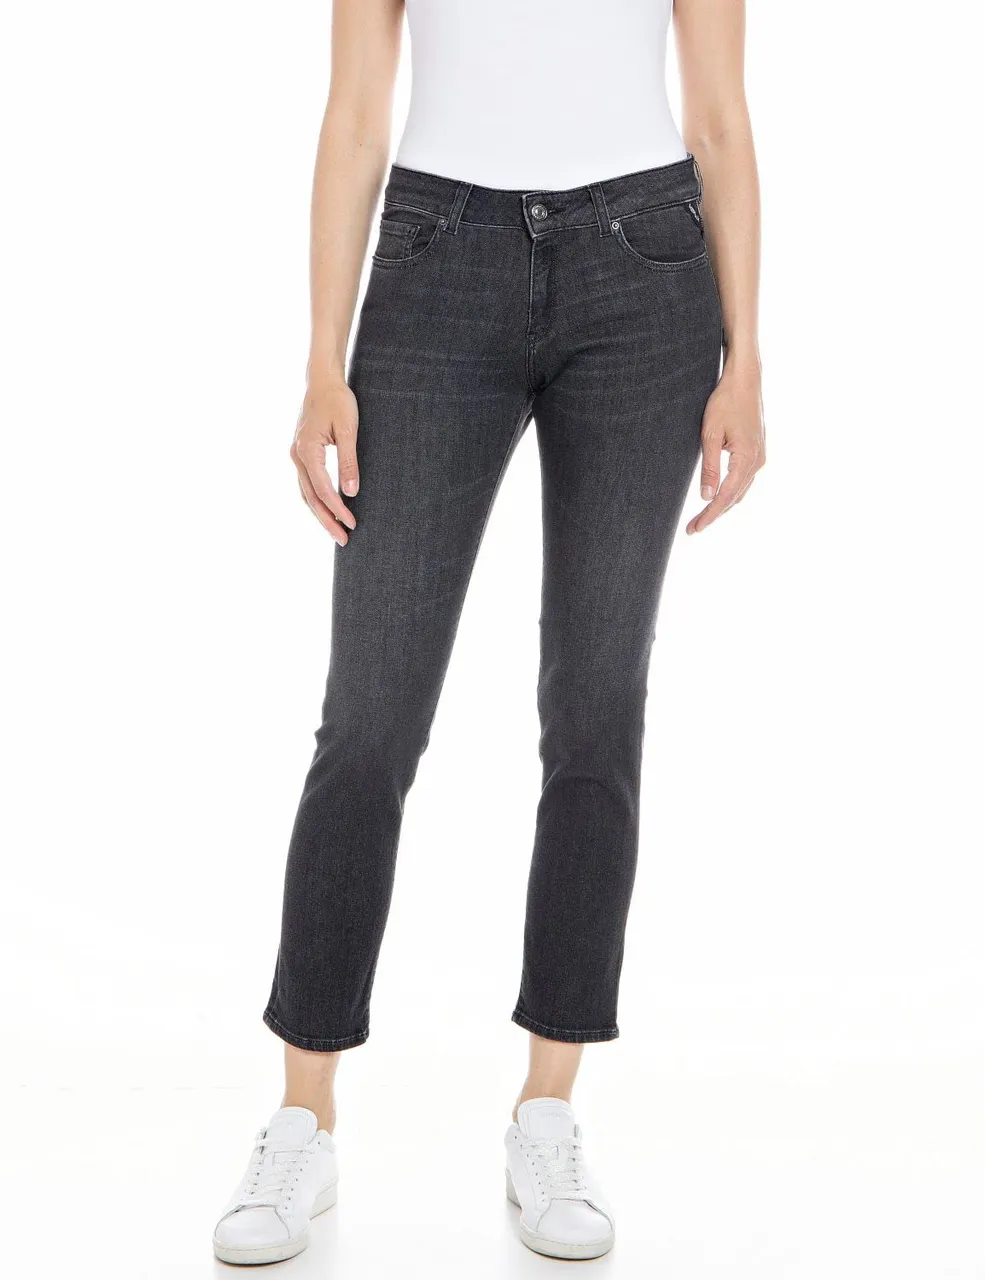 Replay Damen Jeans Faaby Flare-Fit Schlaghose mit Power